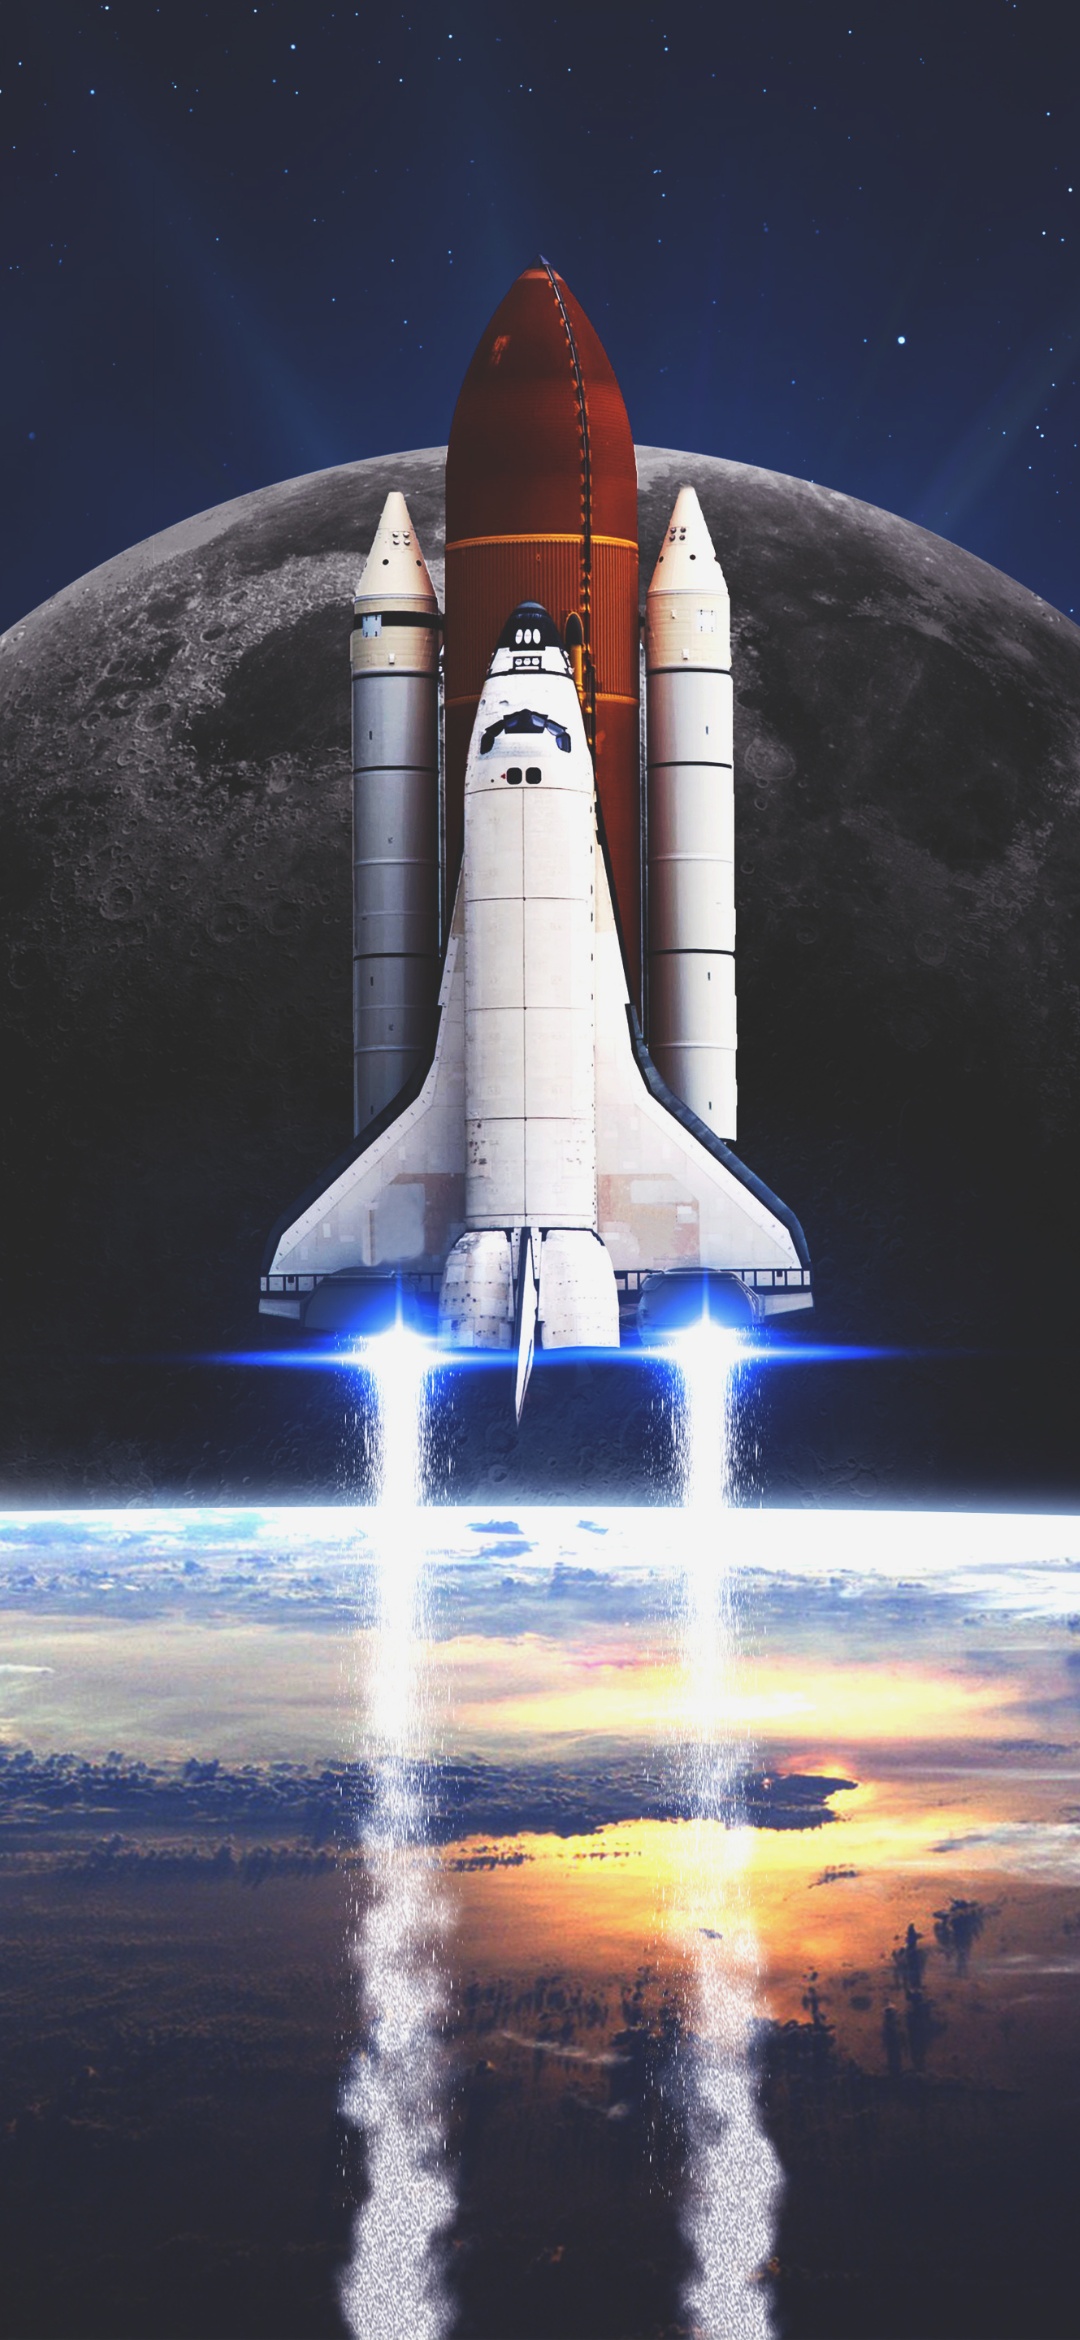 Wallpaper Space Shuttle Profile, Space Shuttle Program, Space Shuttle, Apollo Program, Nasa, Background Free Image